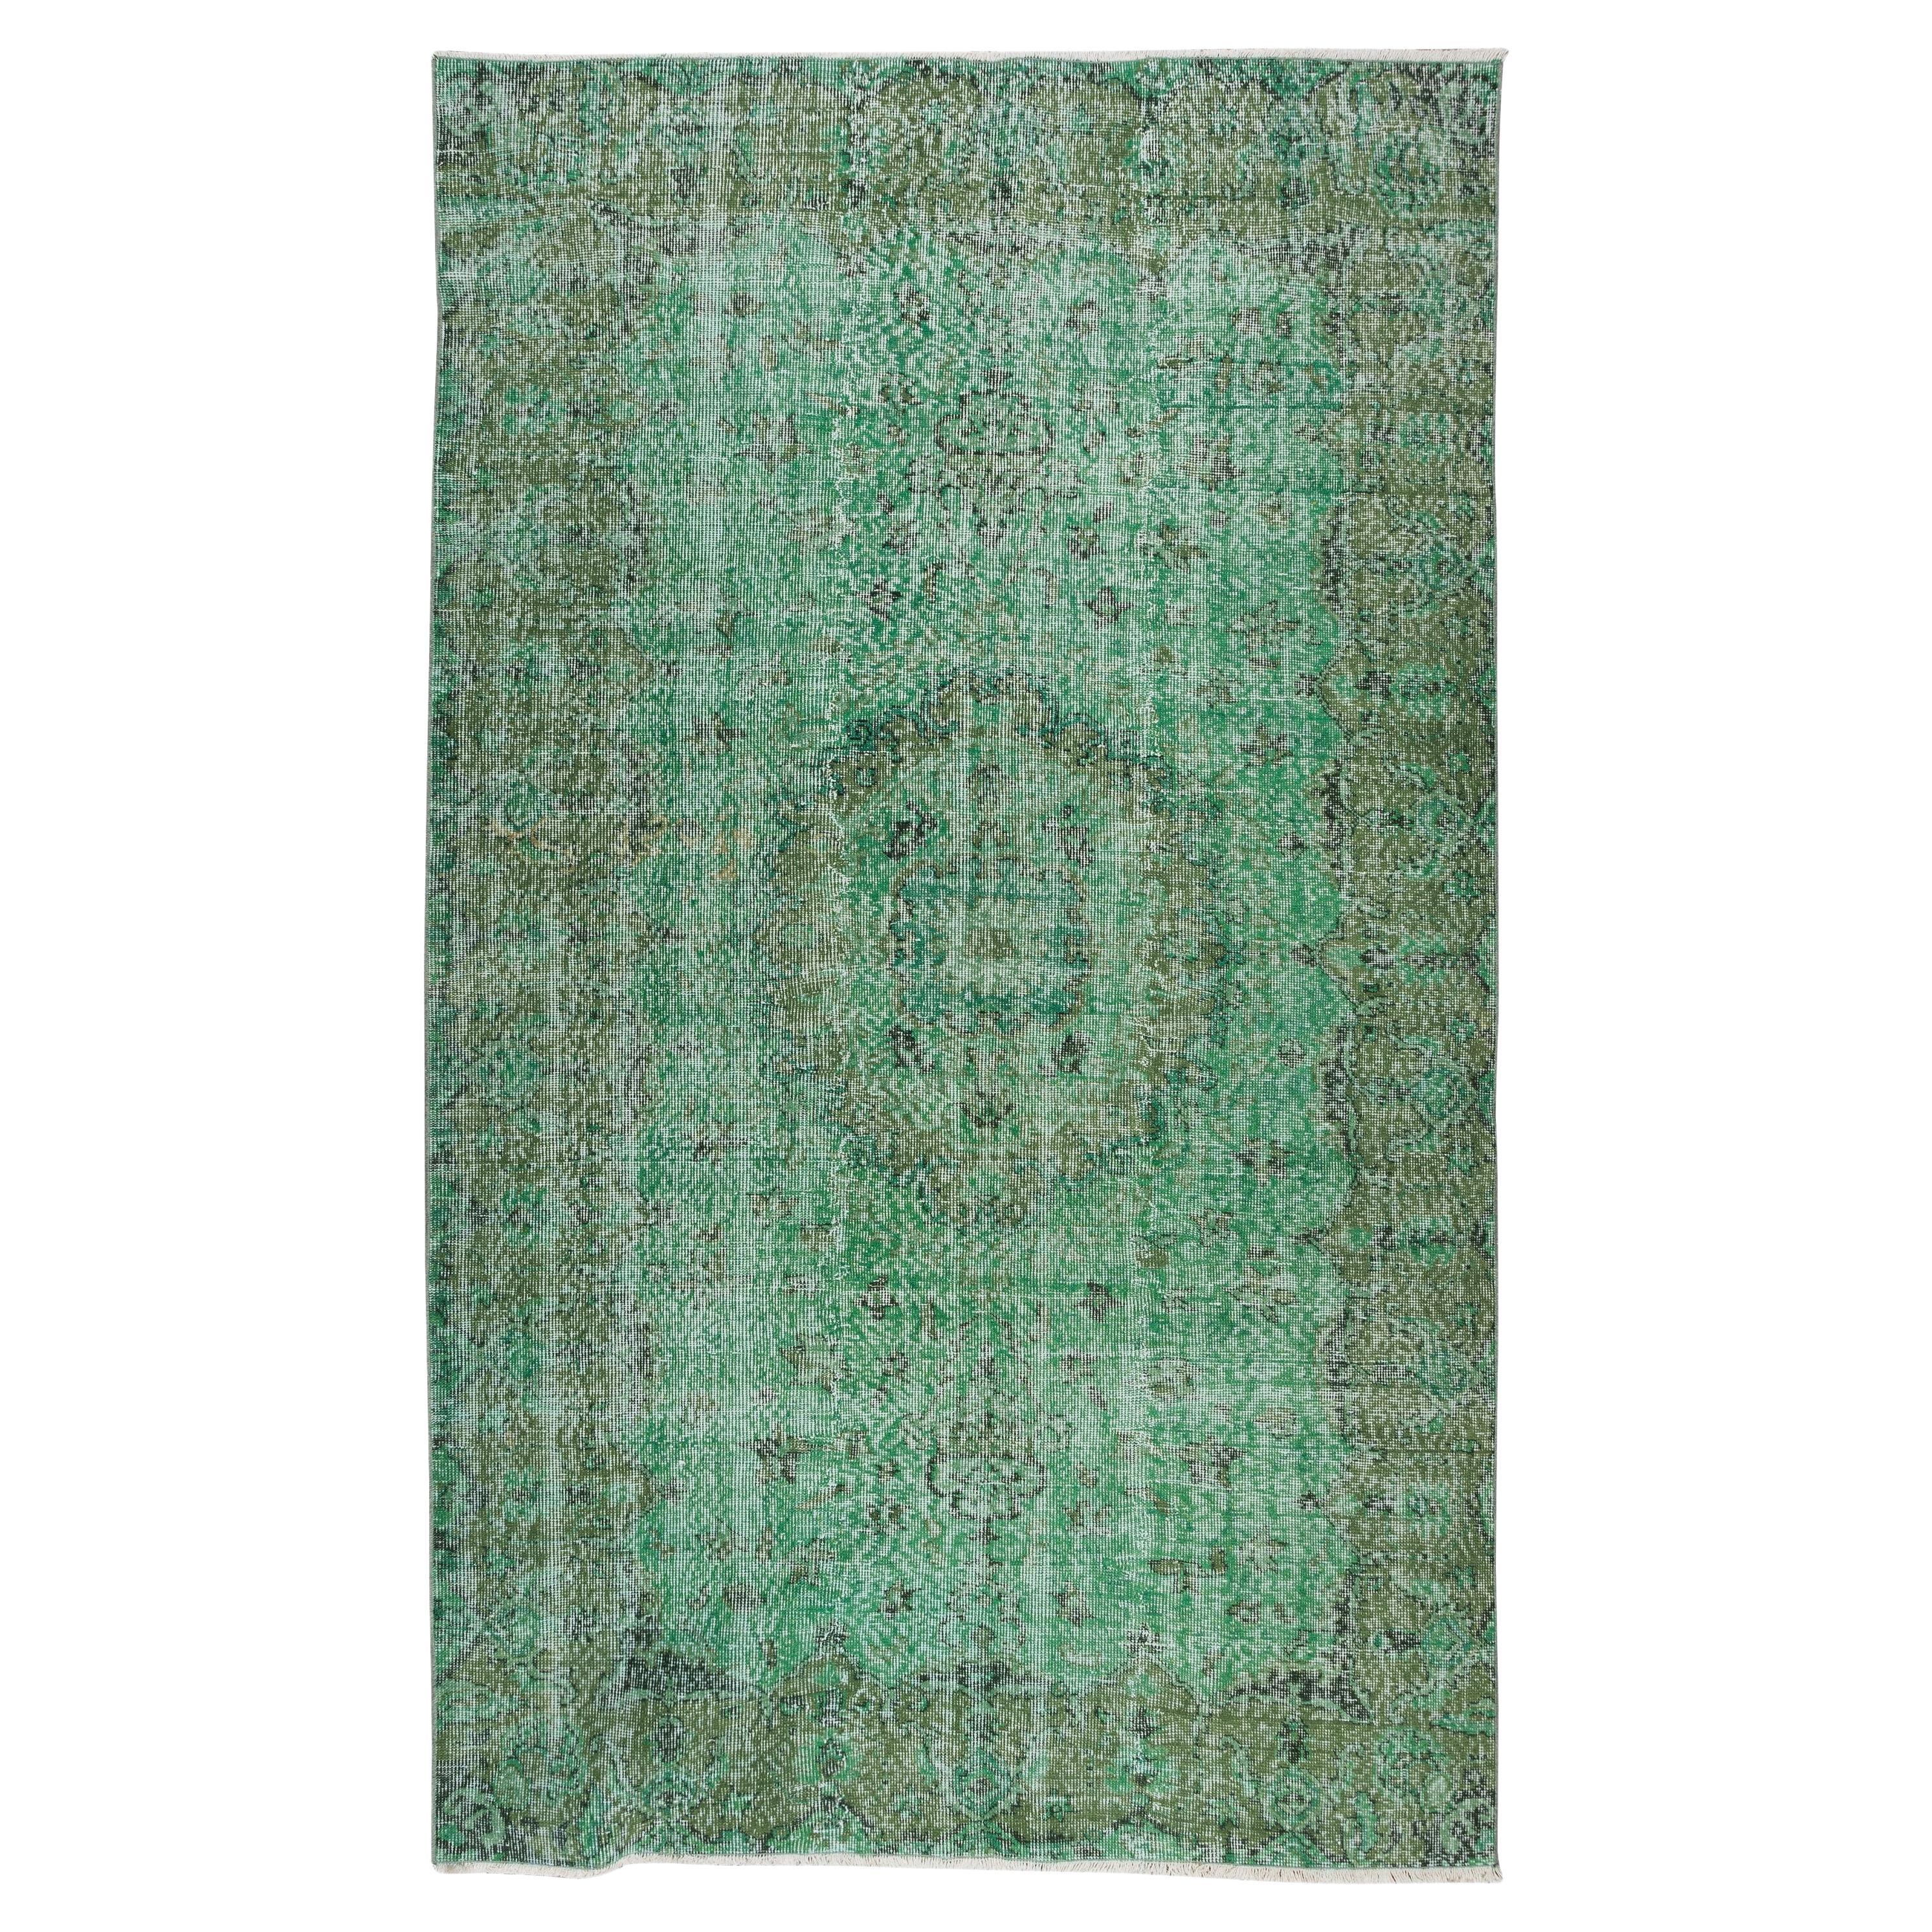 5.6x9.5 Ft Handmade Vintage Turkish Rug Over-Dyed in Green for Modern Interiors